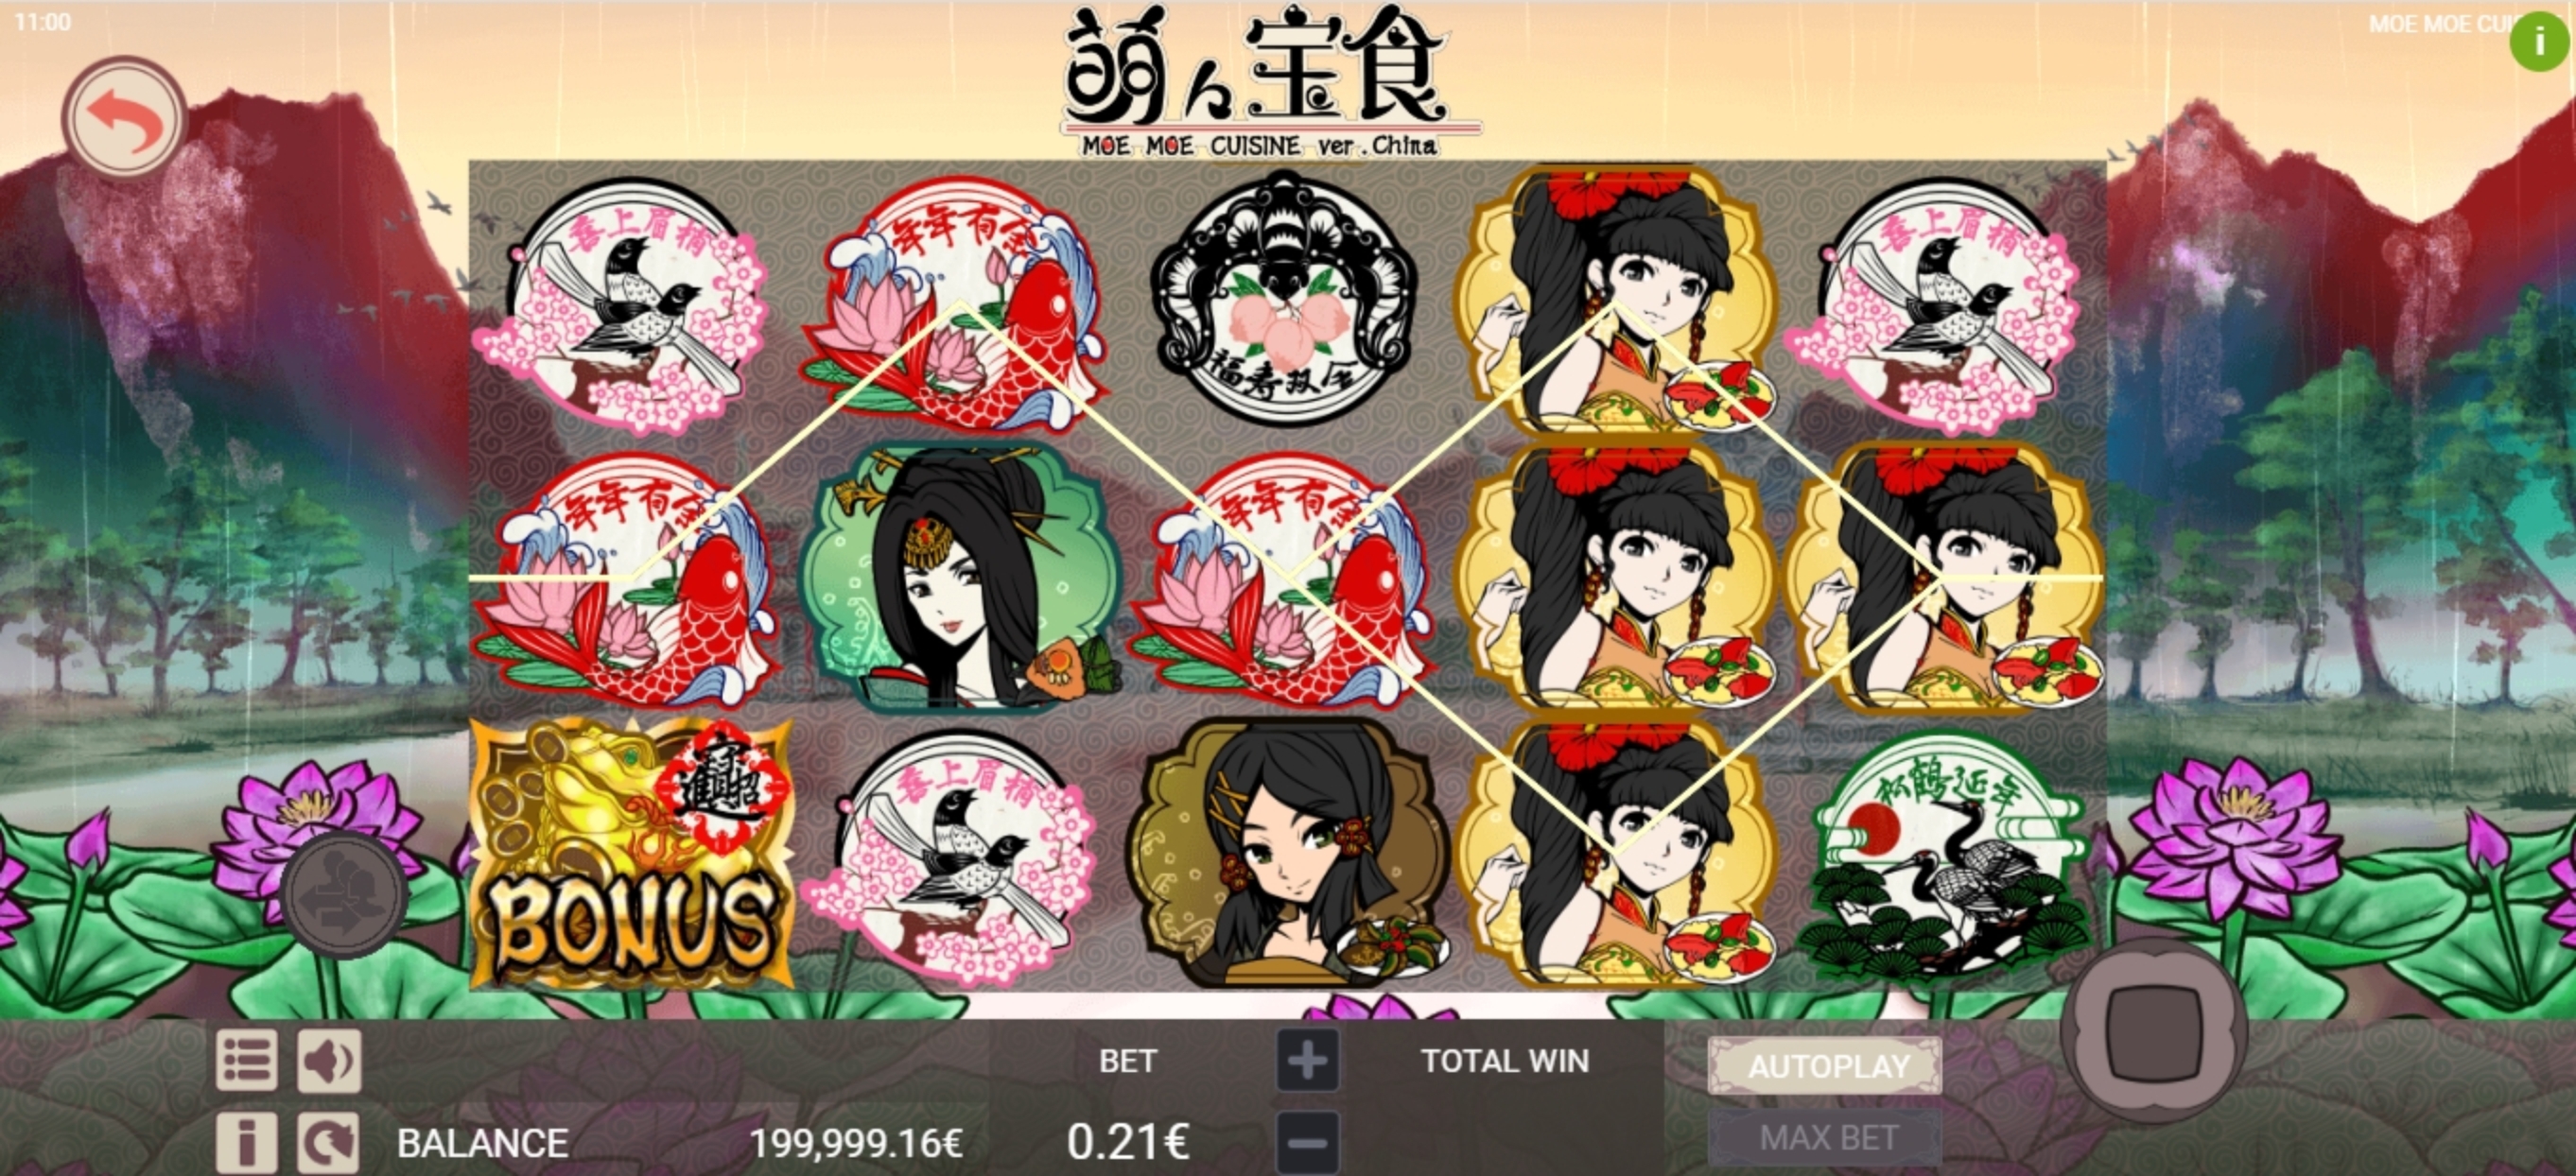 Win Money in Moe Moe Cuisine ver.China Free Slot Game by Gamatron